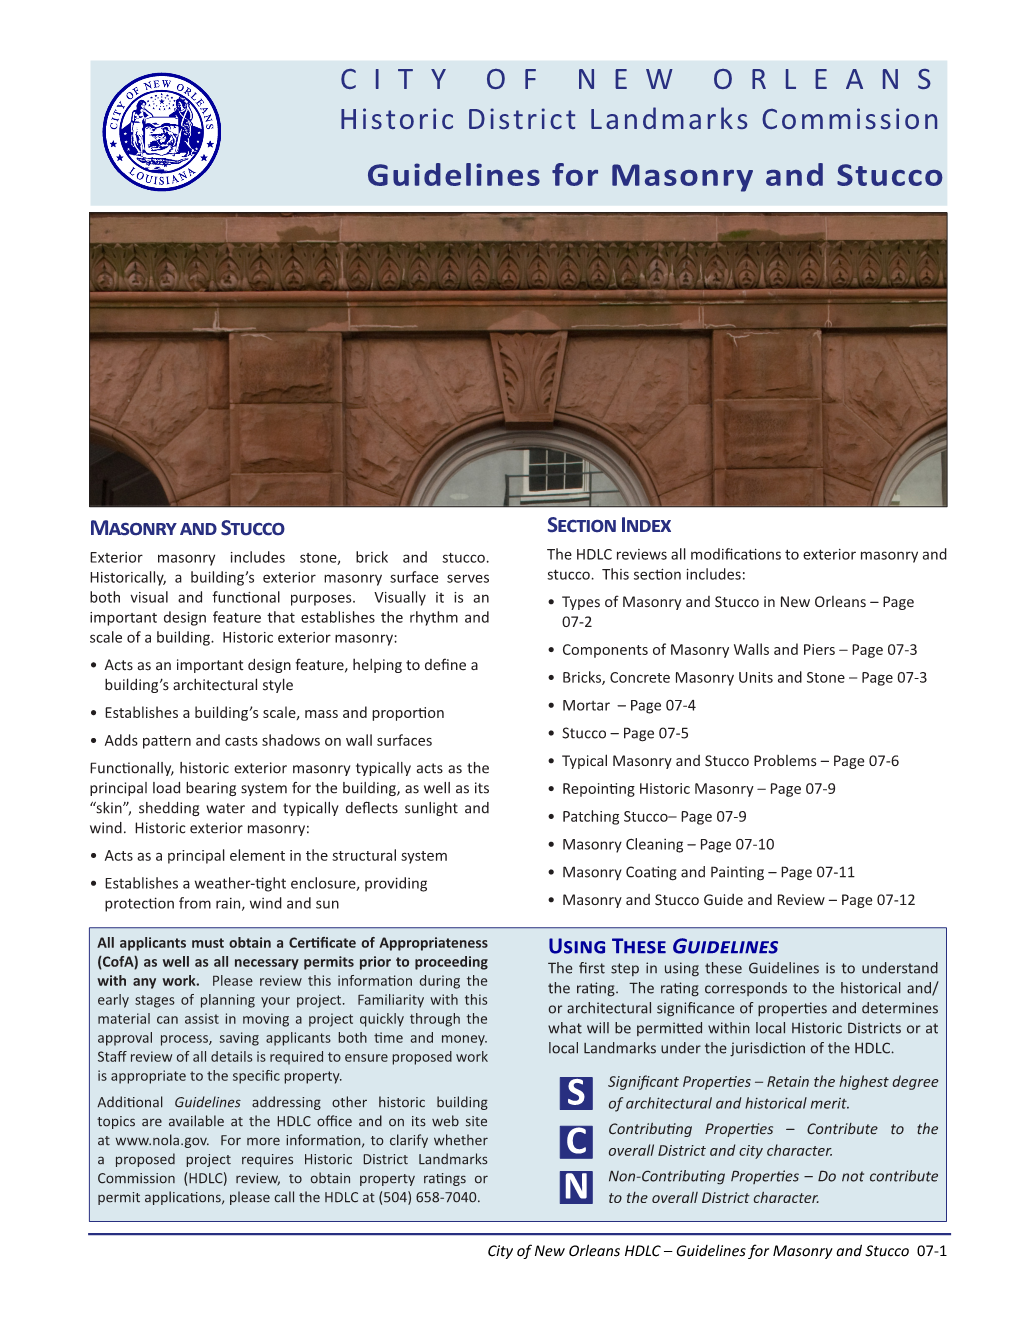 Guidelines for Masonry and Stucco